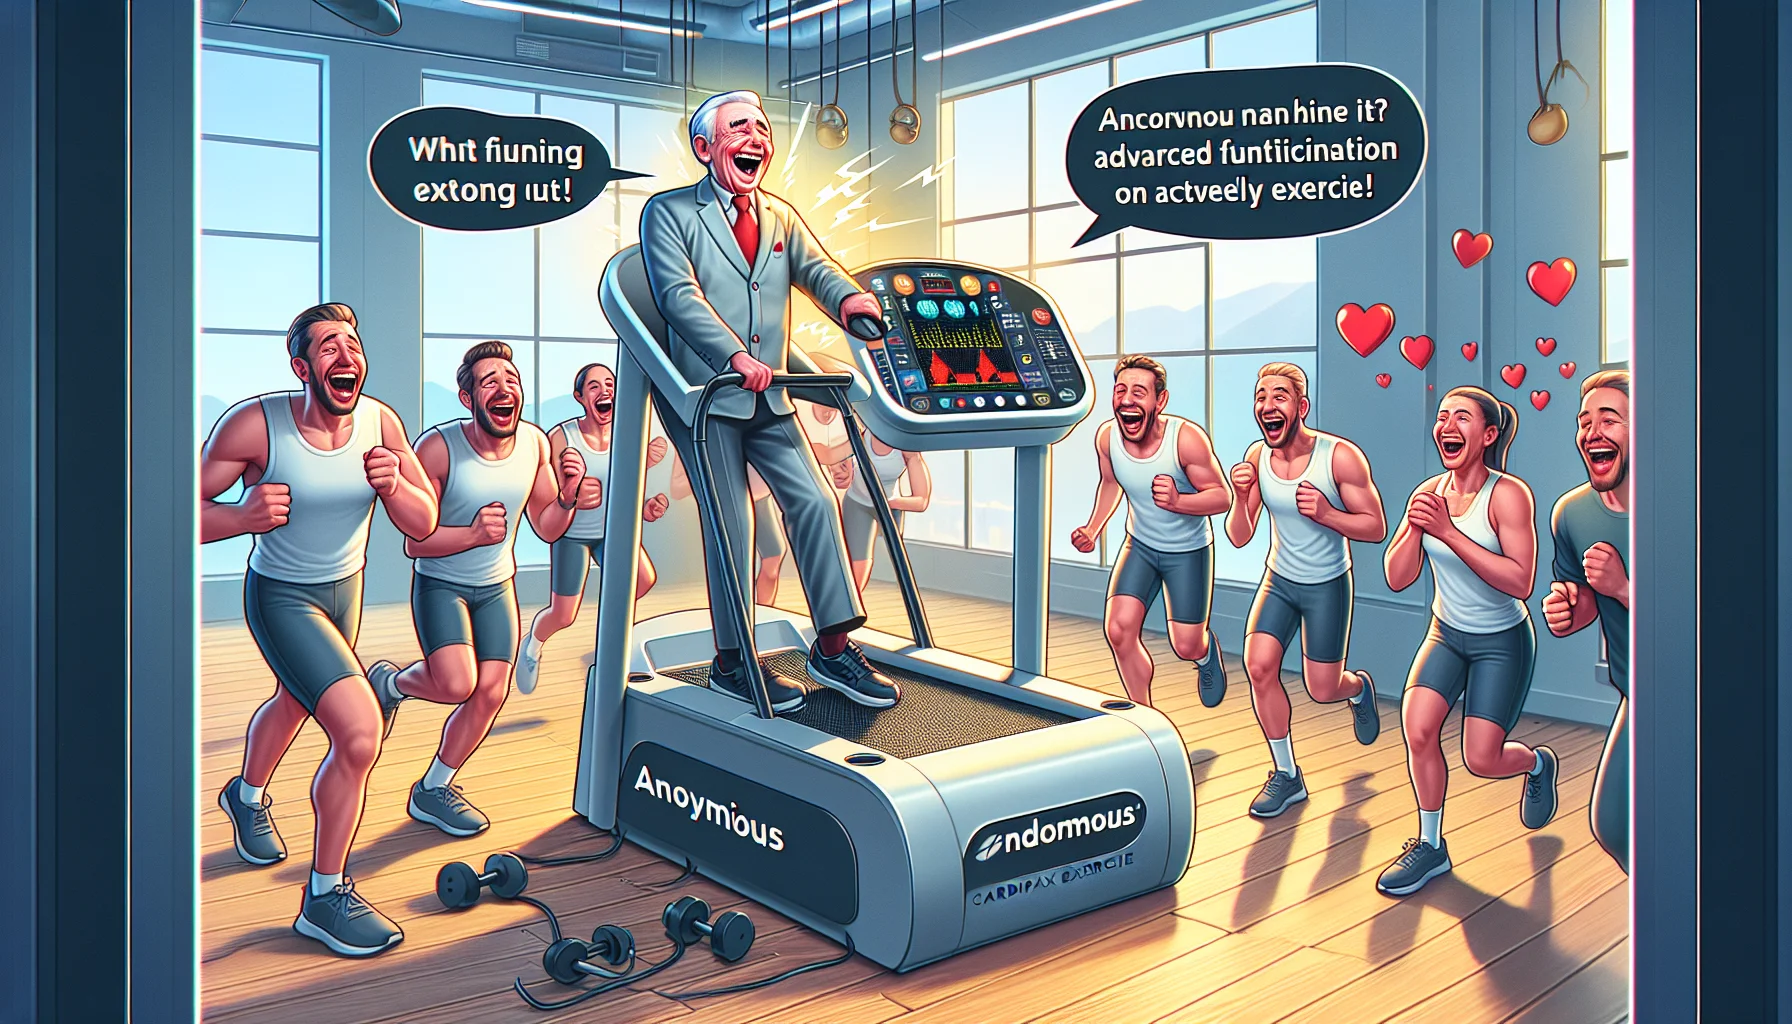 Create an enticing image of a humorous scenario featuring an anonymous cardiac exercise machine (resembling the advanced functionality of a Cardiax 3N Pro) in action. The scene is in a bright, welcoming gym space and includes various people laughing and working out. Each person displays a look of amusing surprise on their faces, further enhancing the comical aspect. Incorporate an encouraging message in bold, lively text to motivate viewers to actively exercise. Include prominent elements such as the machine's multiple displays, unique design, and innovative features.